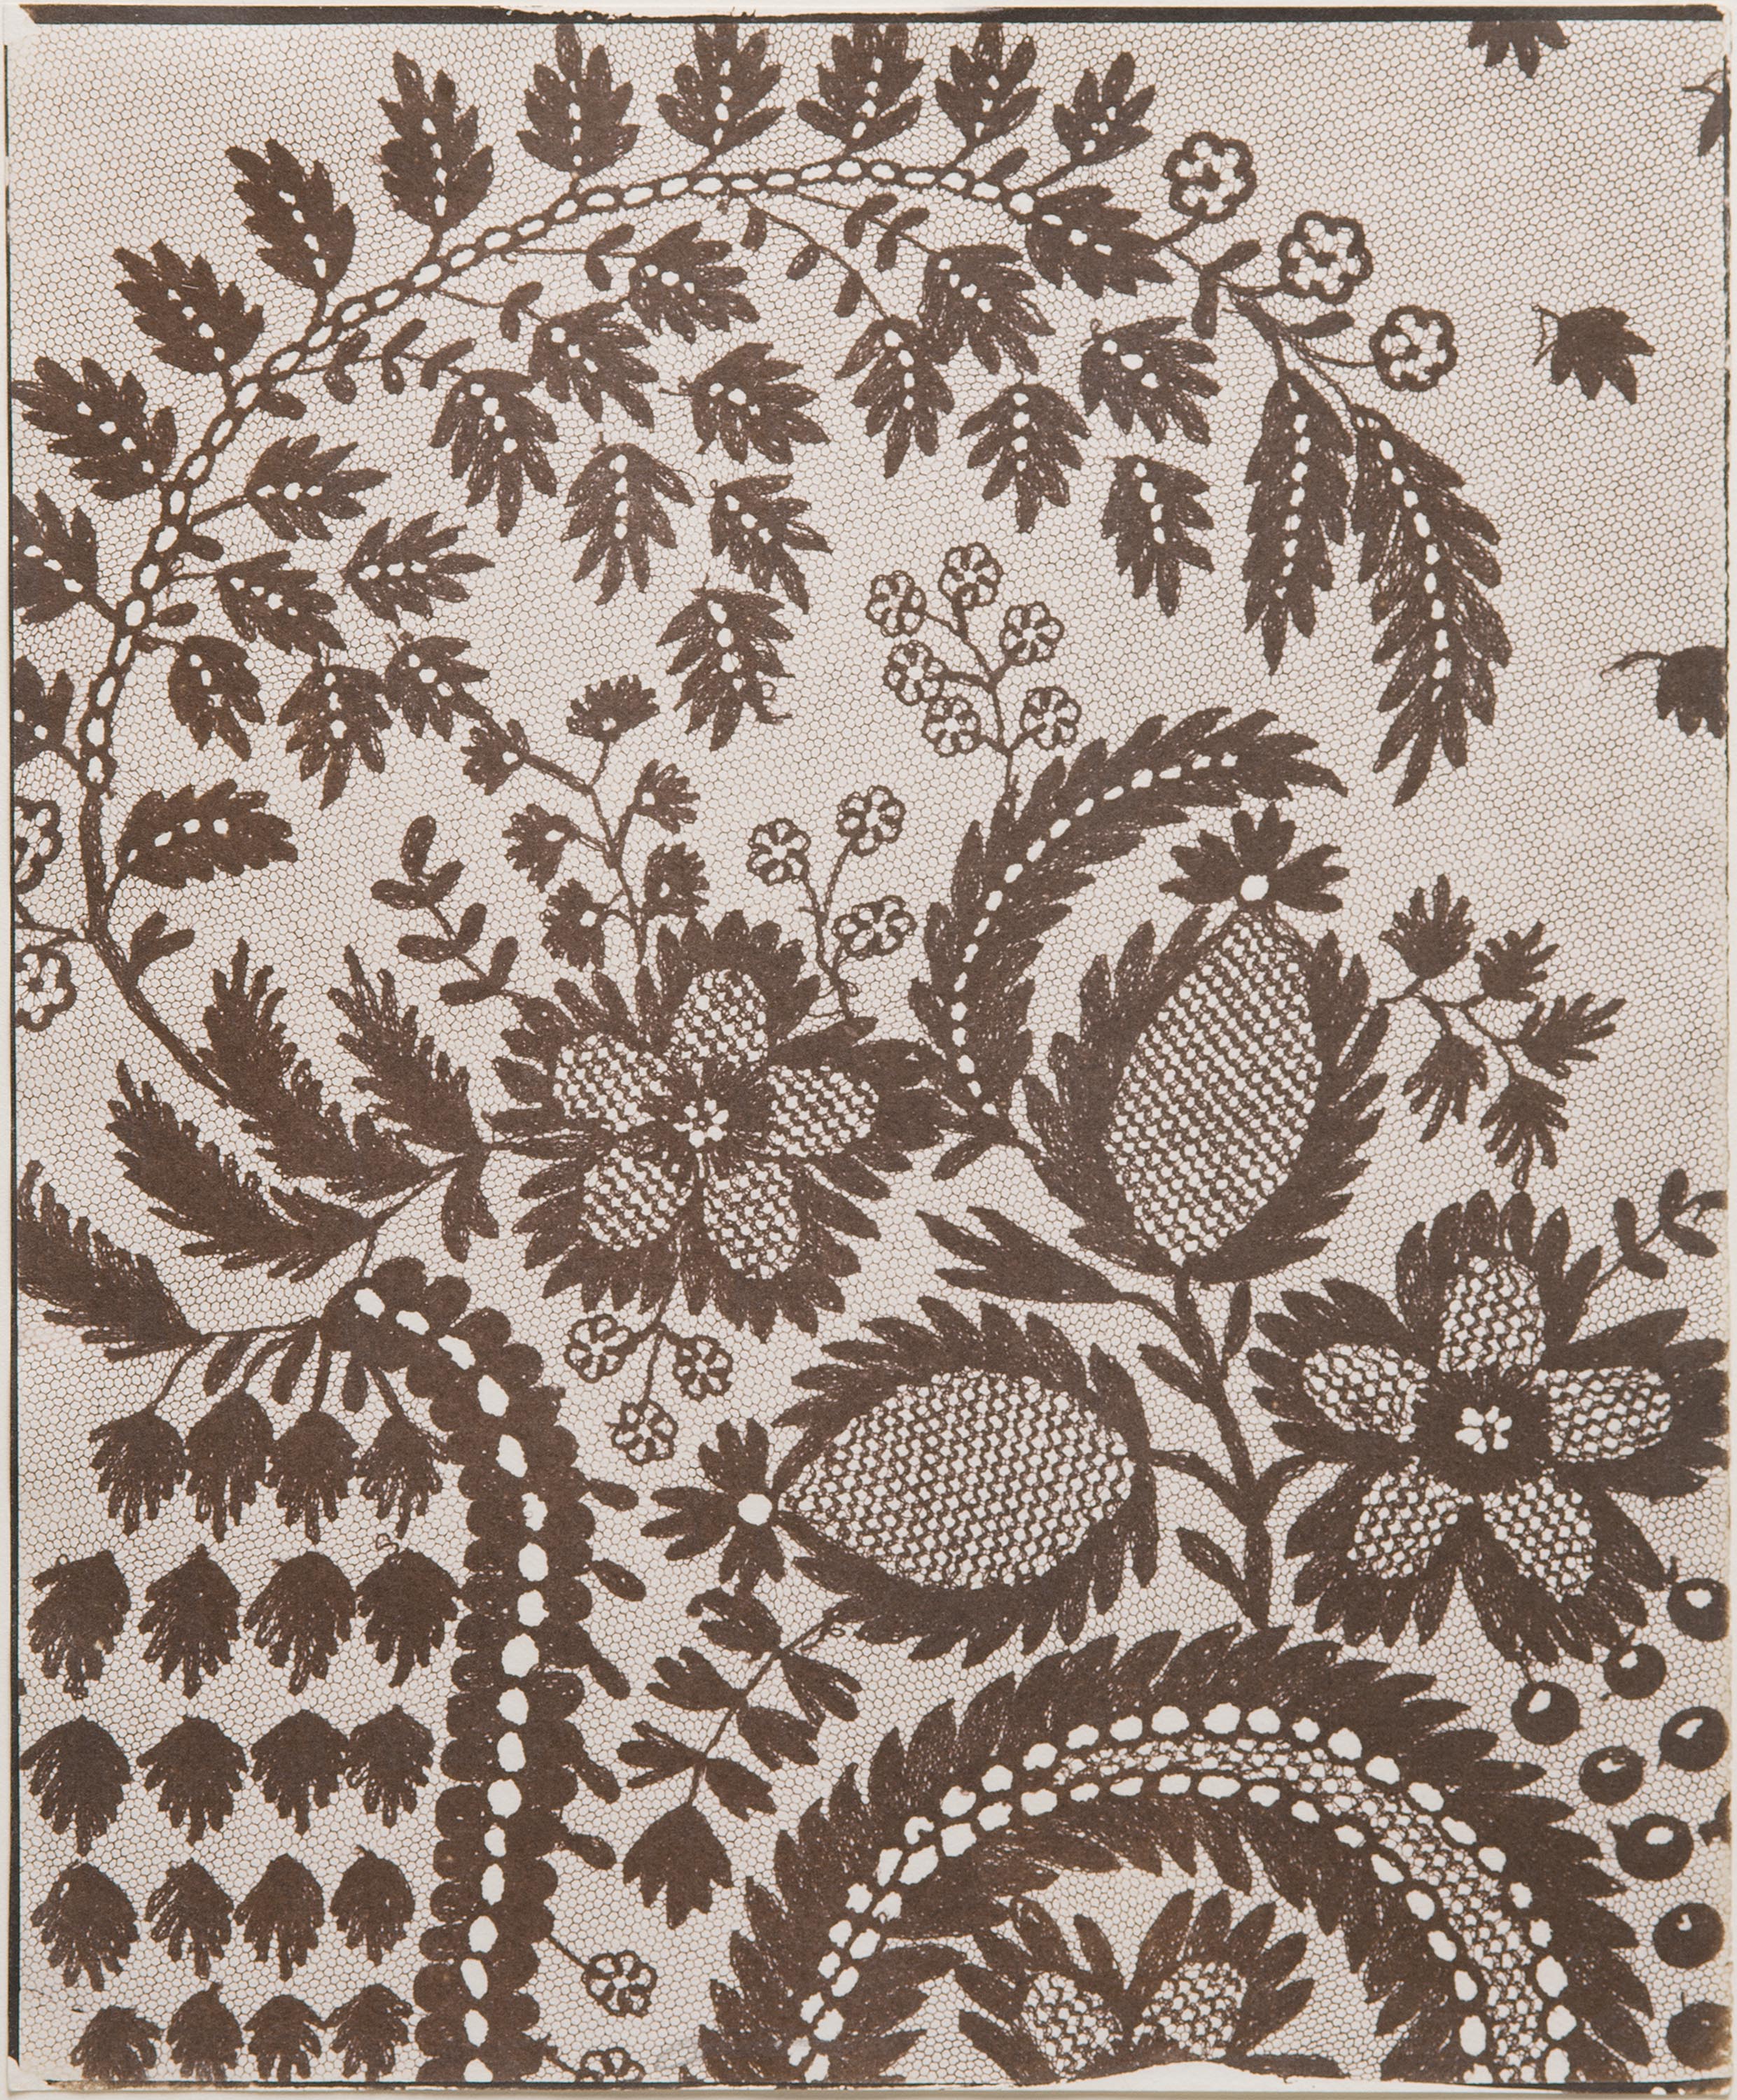 Close-up view of lace patterns, composed of botanical patterns, leaves, flowers, sheaves of grain twisting around one another